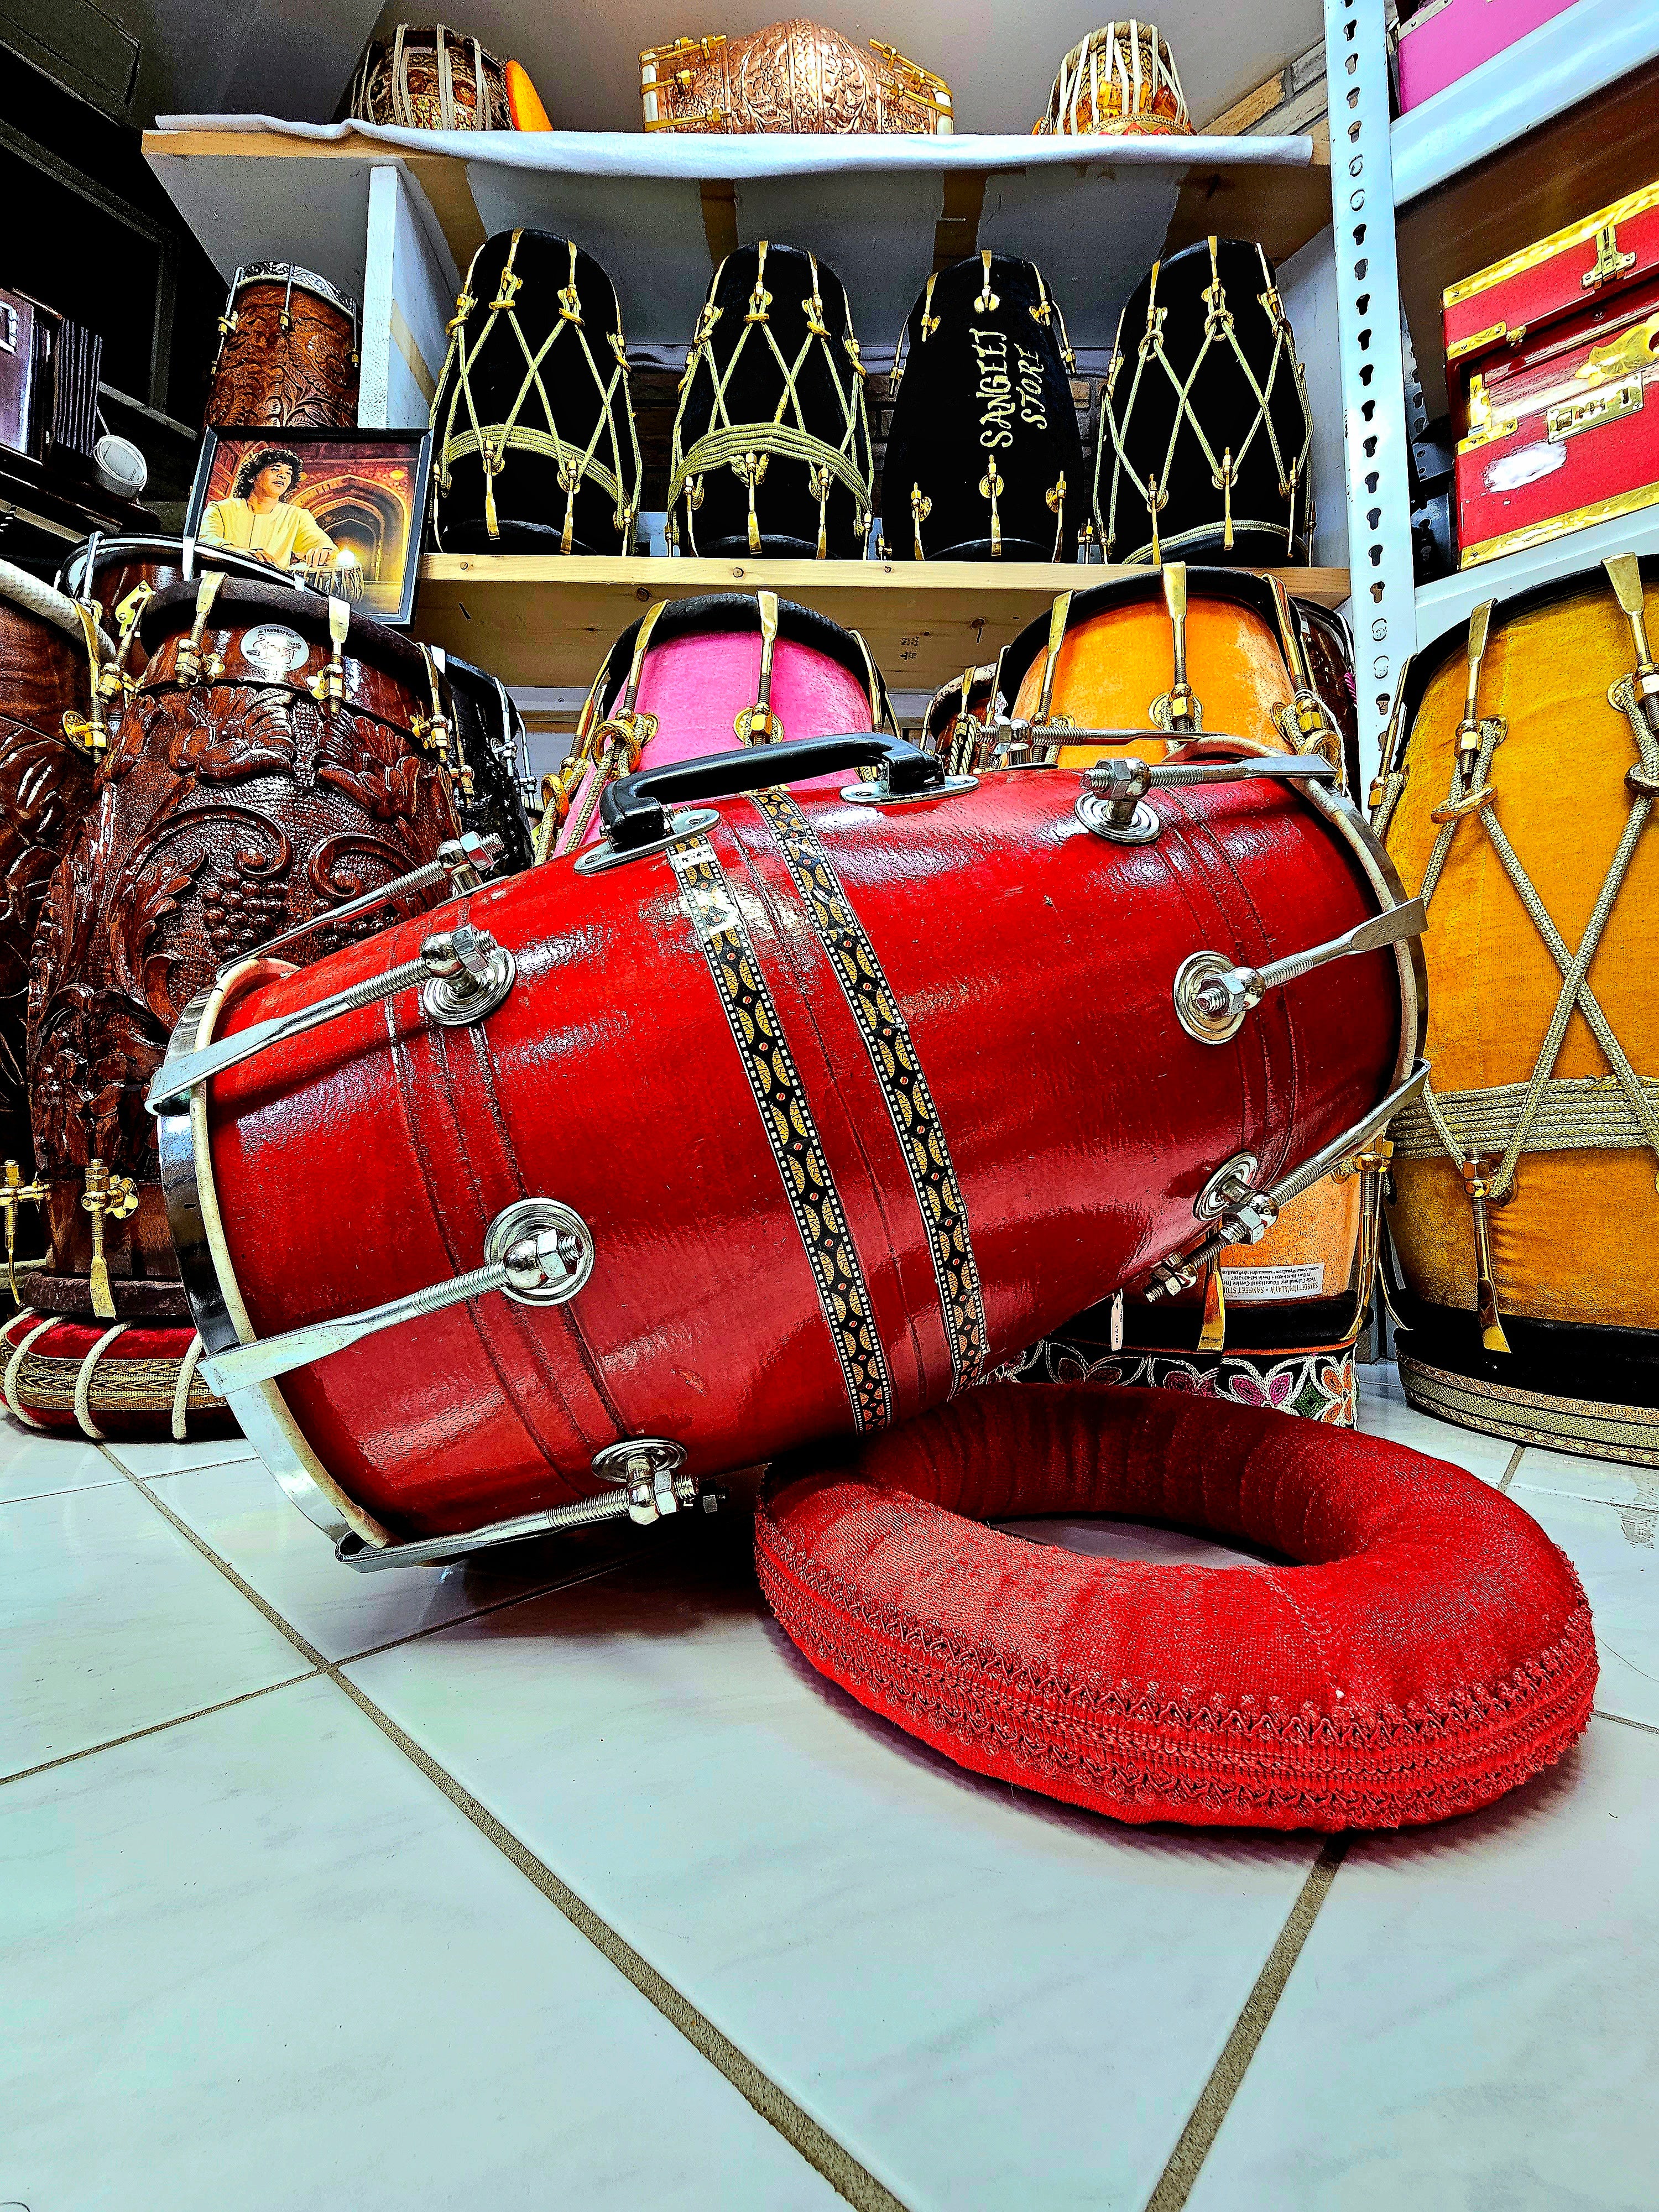 Crimson Cadence: Red Student Quality Dholak with Chrome Bolts, Metal Rim, and Handle